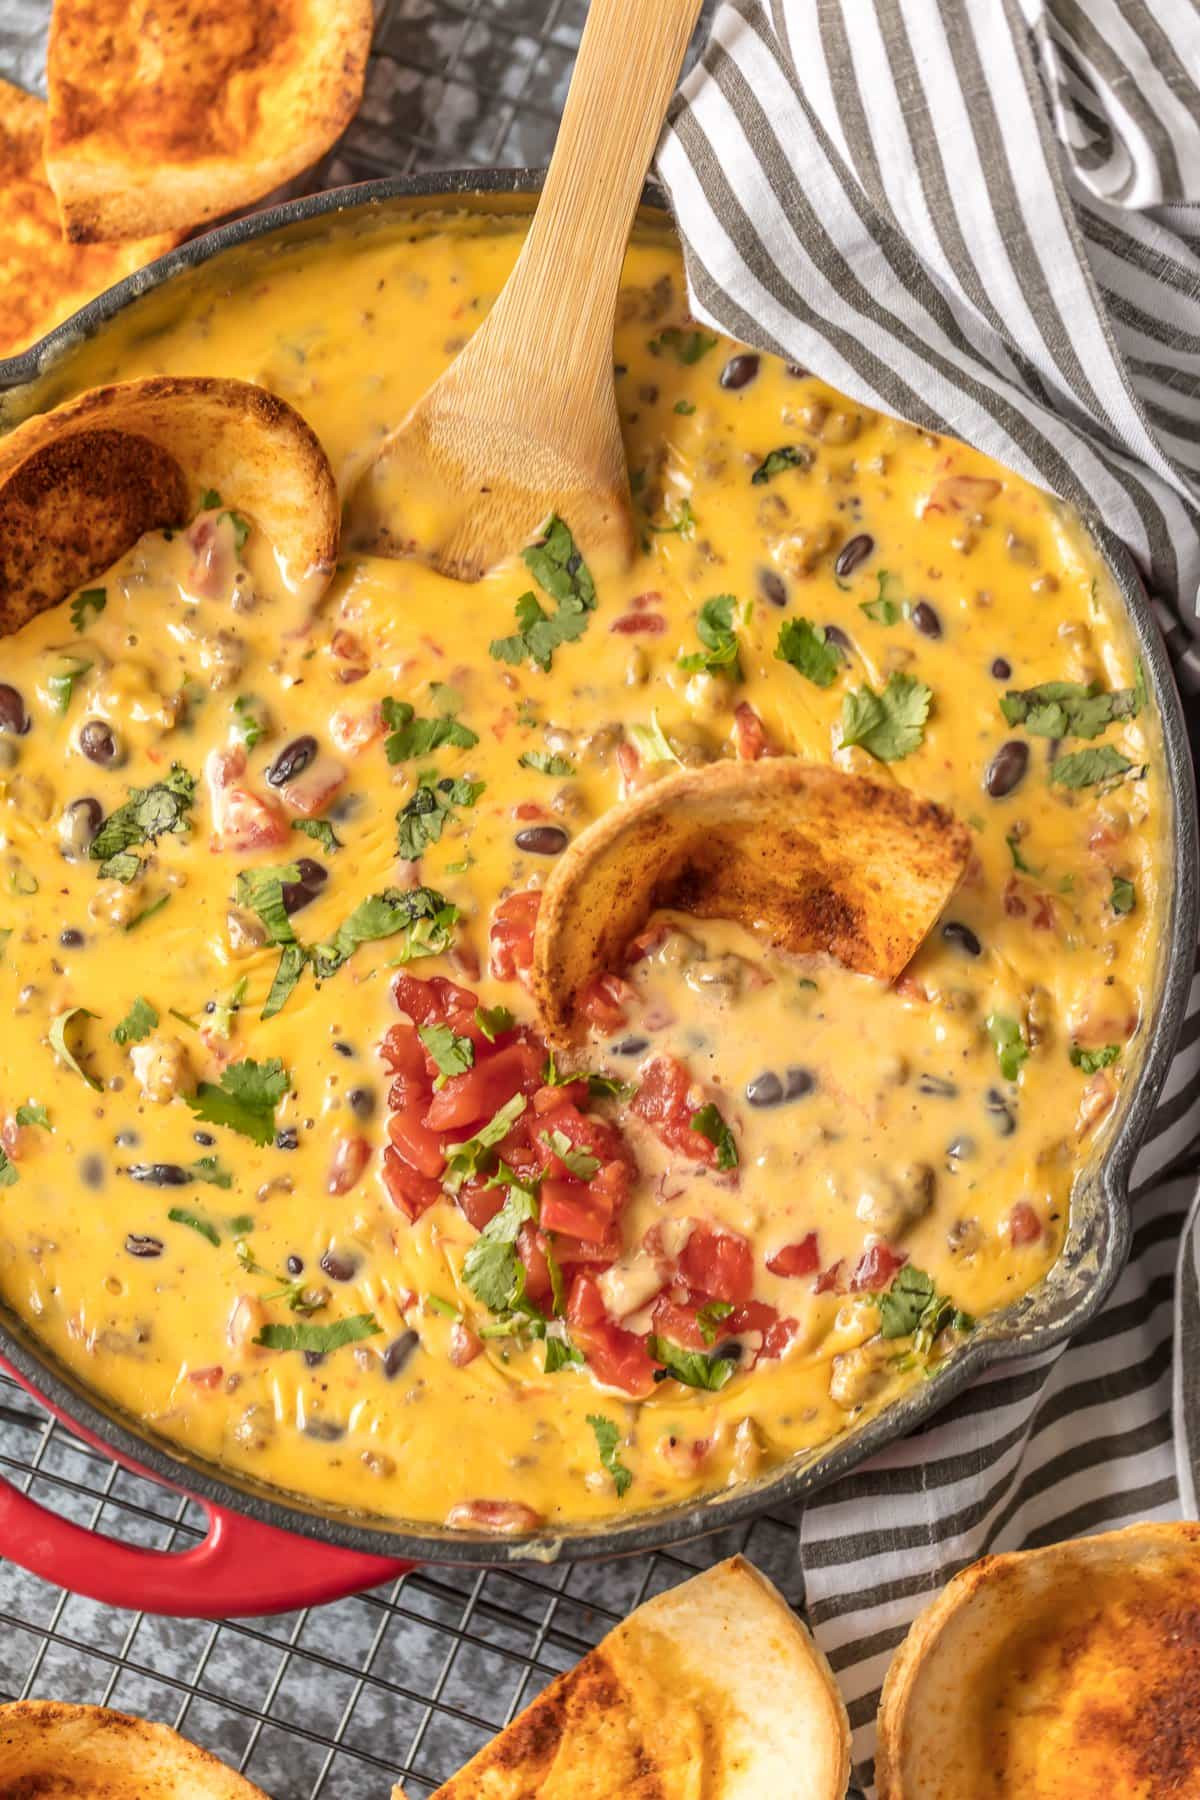 Velveeta Queso Dip With Ground Beef
 rotel dip with ground beef